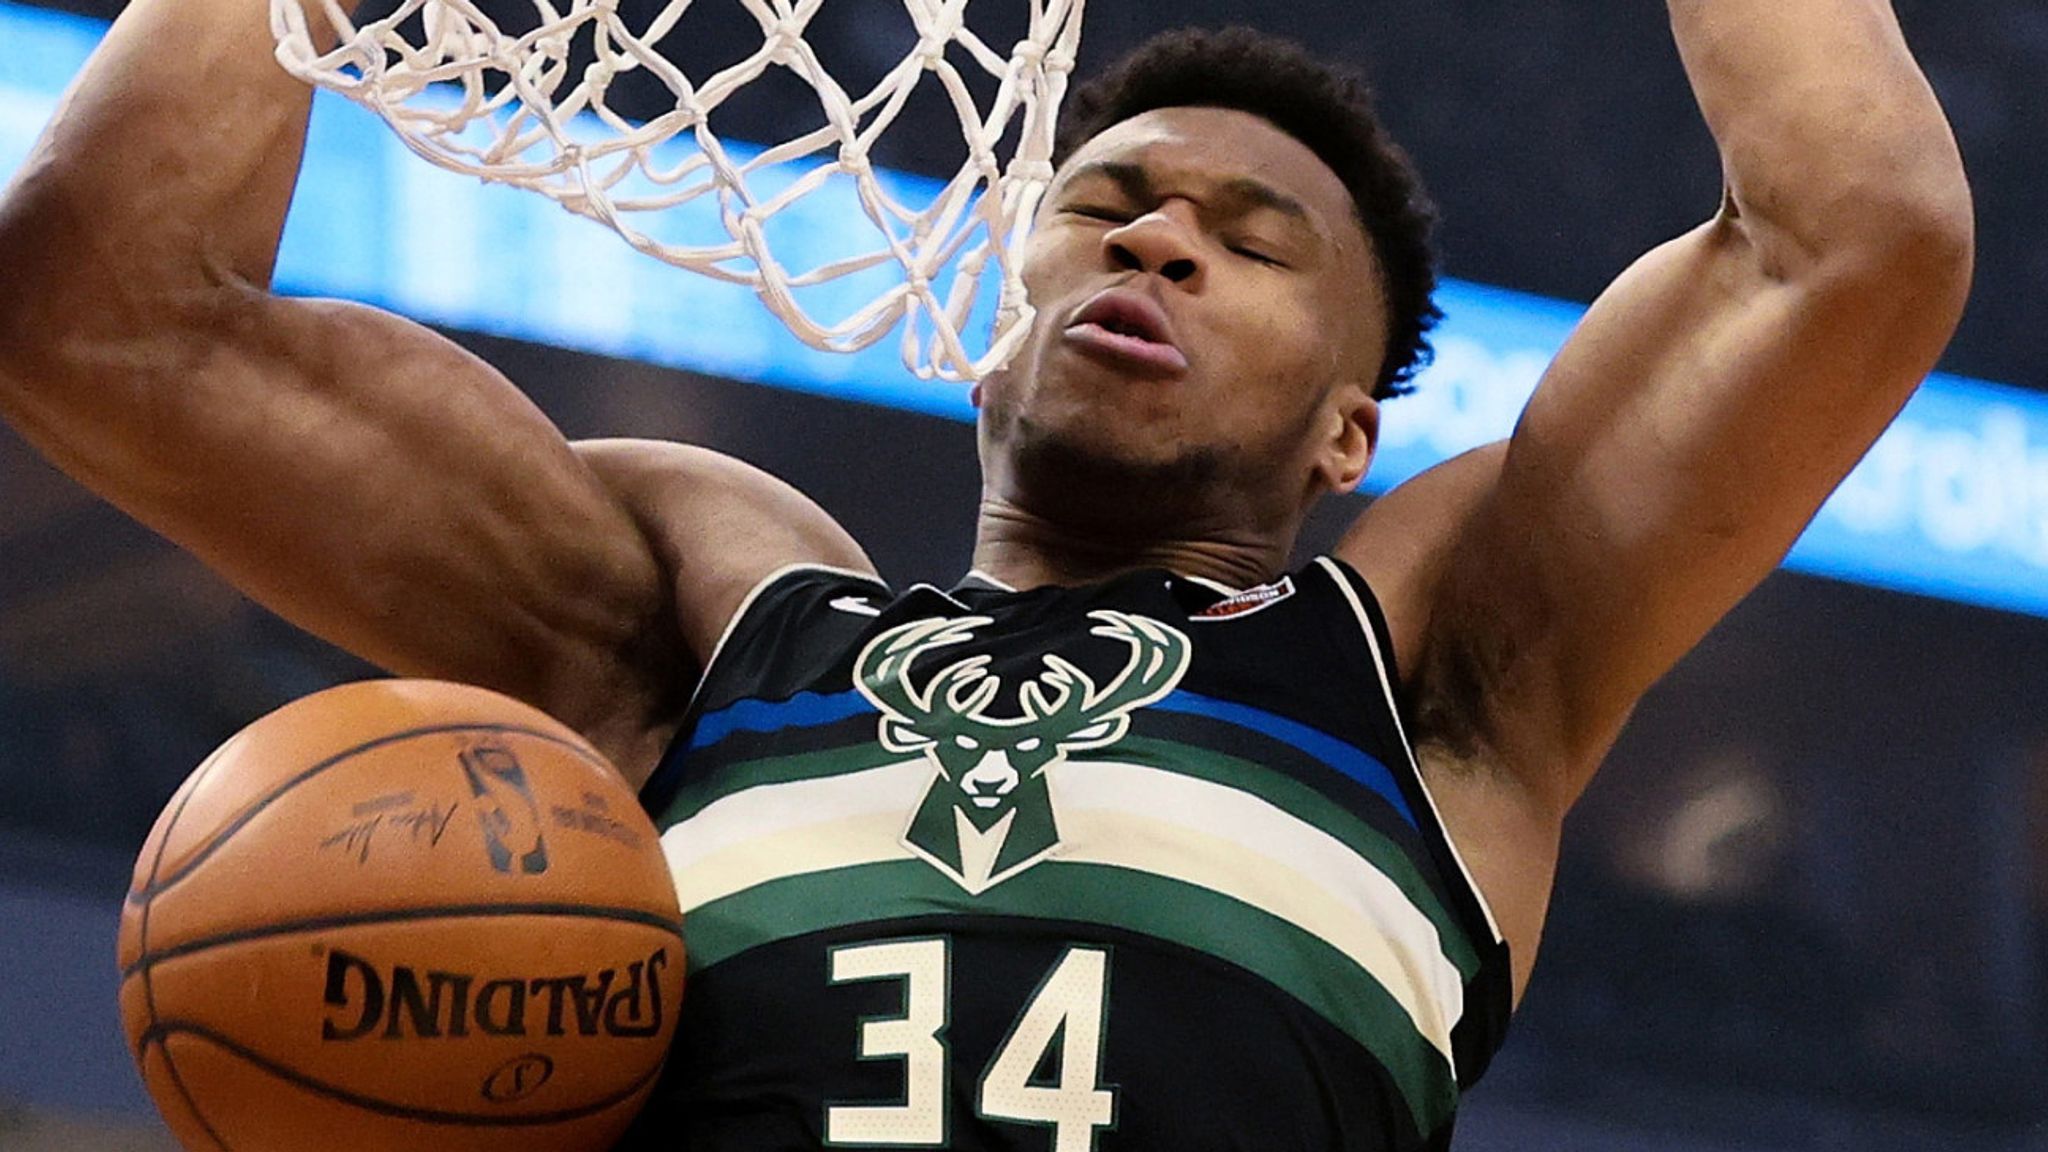 Alex Antetokounmpo, brother of Giannis, to play pro in Europe